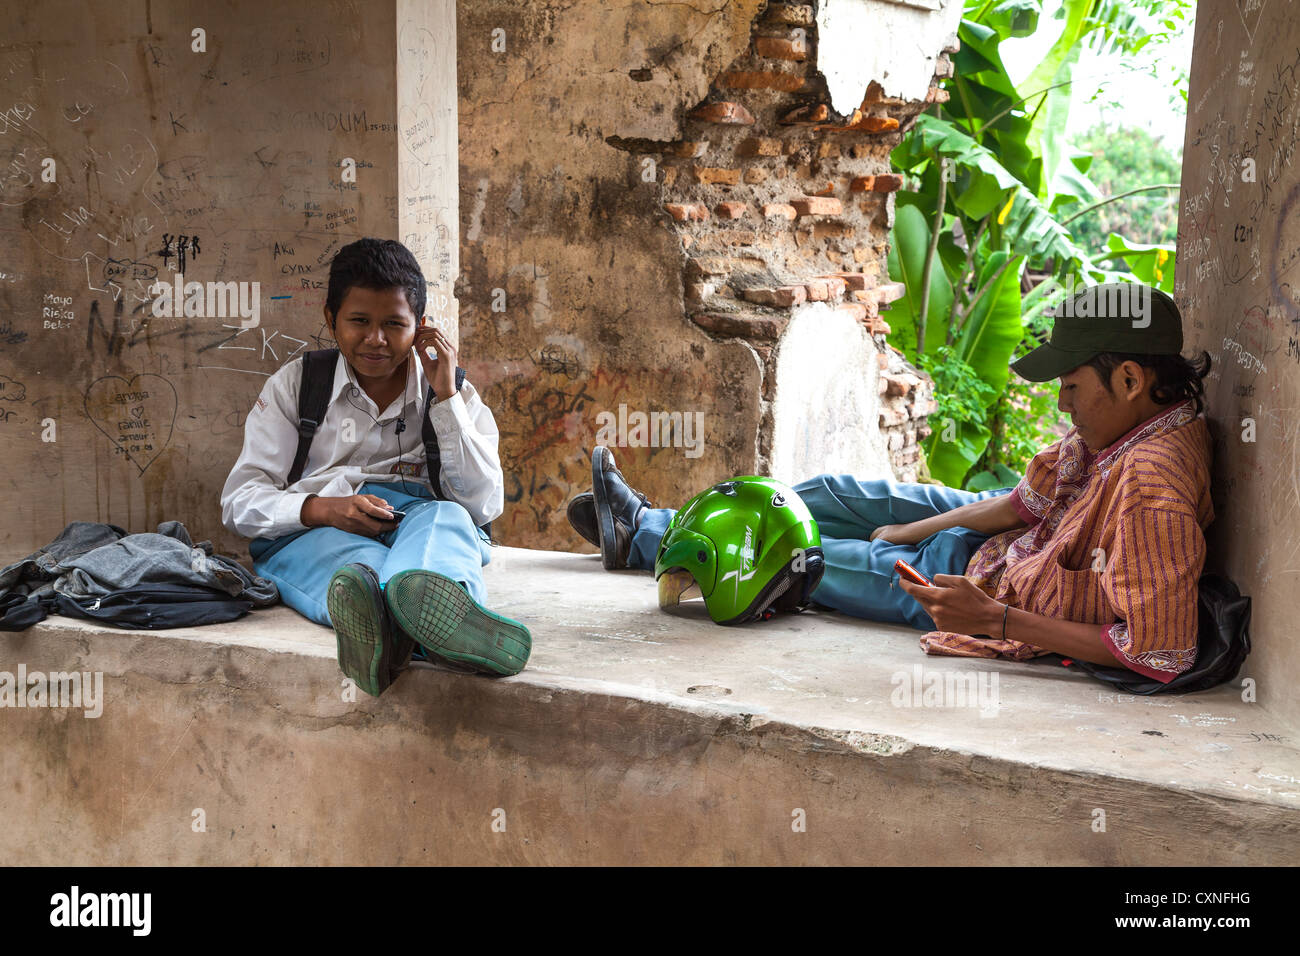 Street Life in the Old Town of Yogyakarta in Indonesia Stock Photo